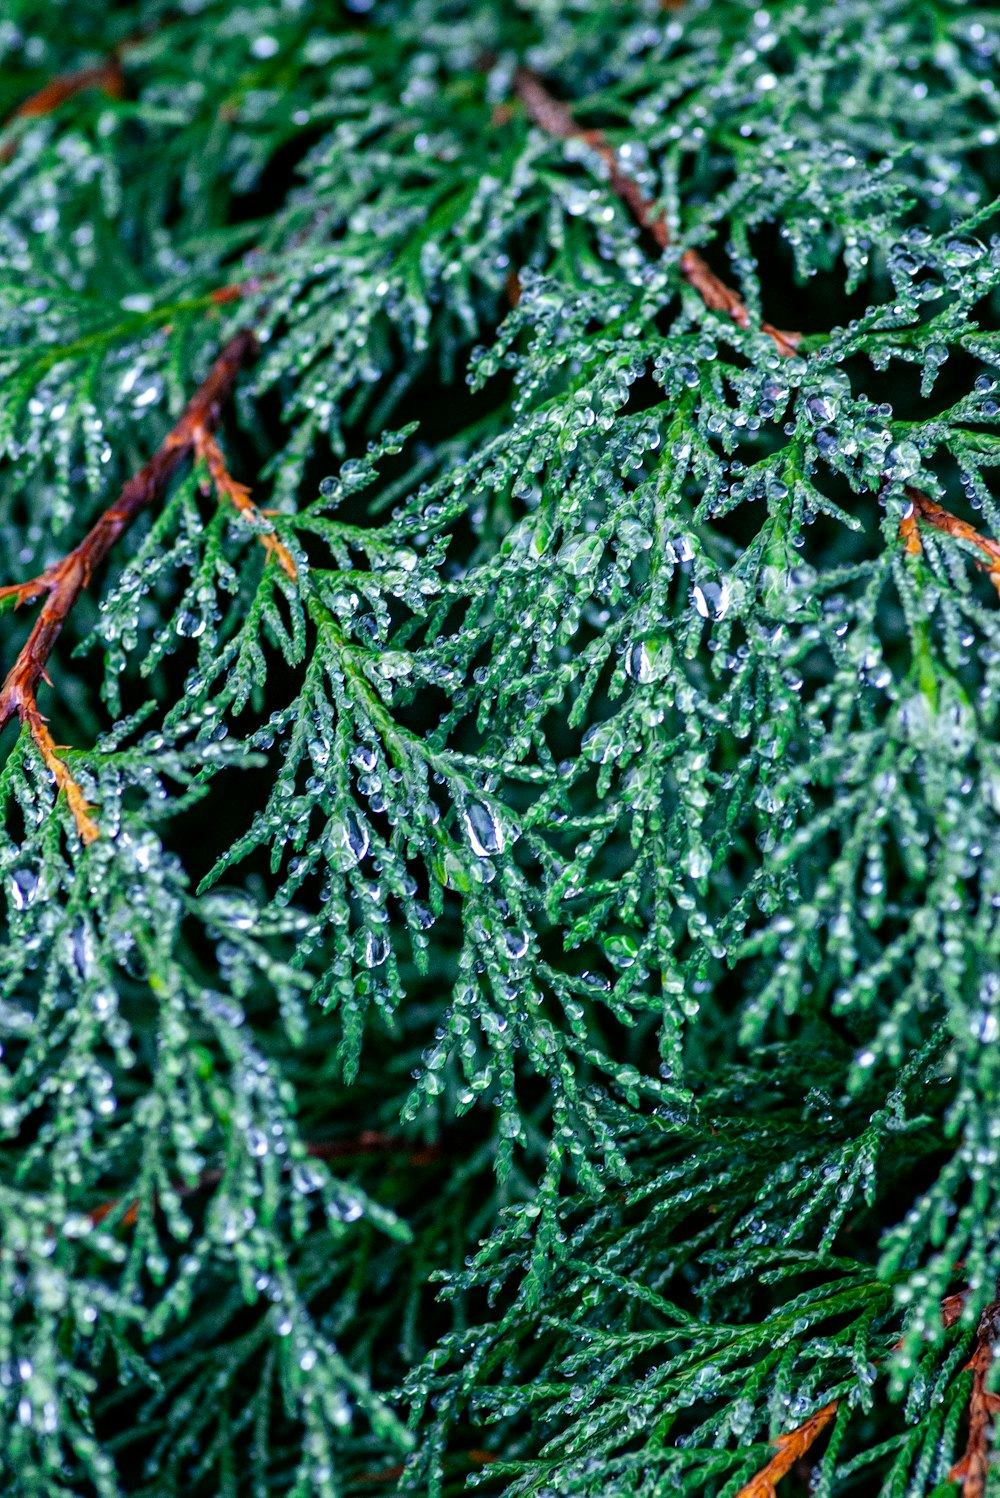 a close up of a pine tree with drops of water on it